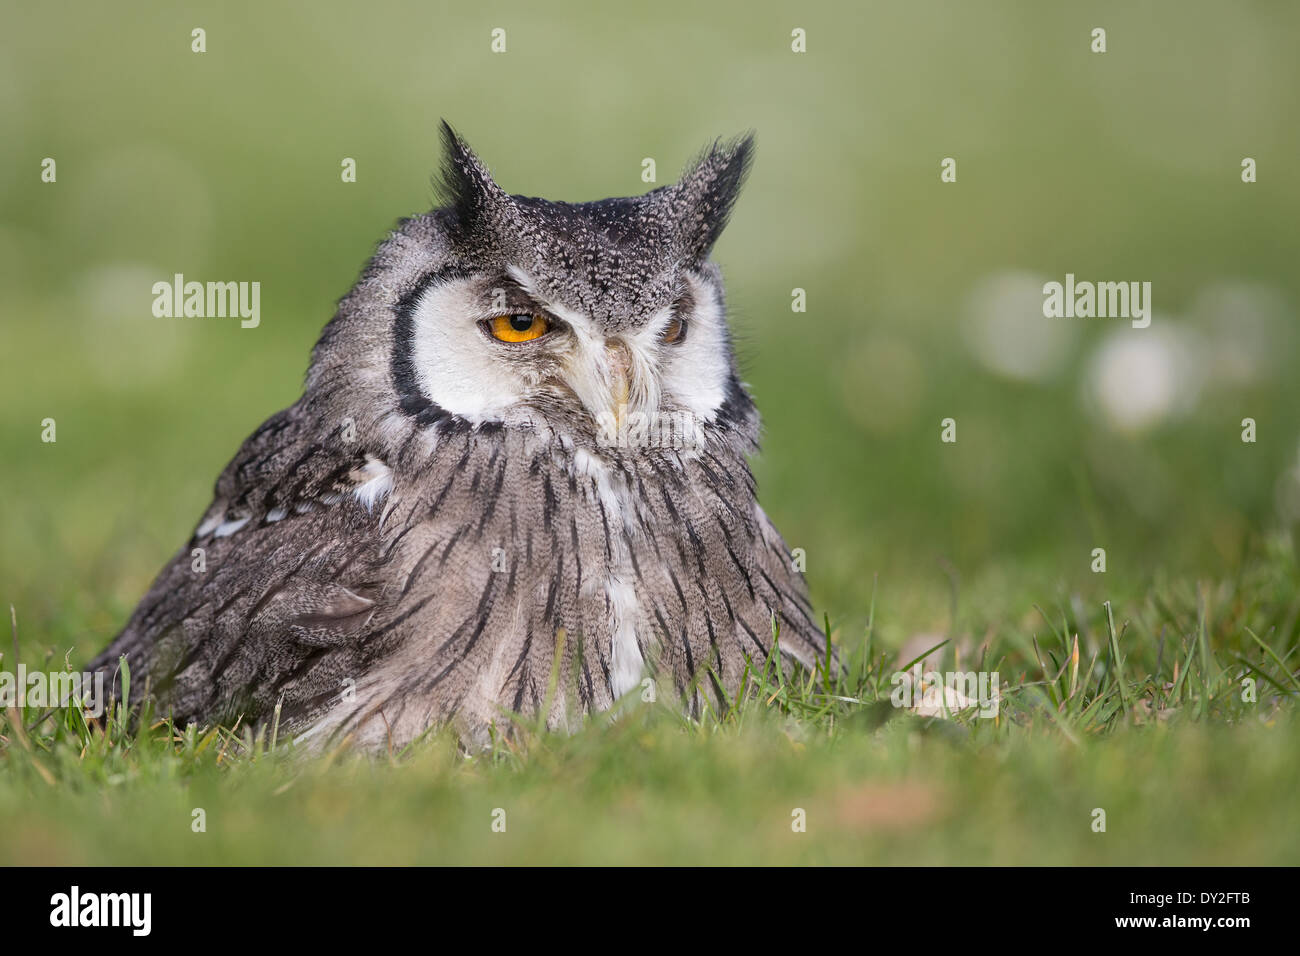 Southern White-faced Scops Owl (Ptilopsis grant) sitting in short grass Stock Photo